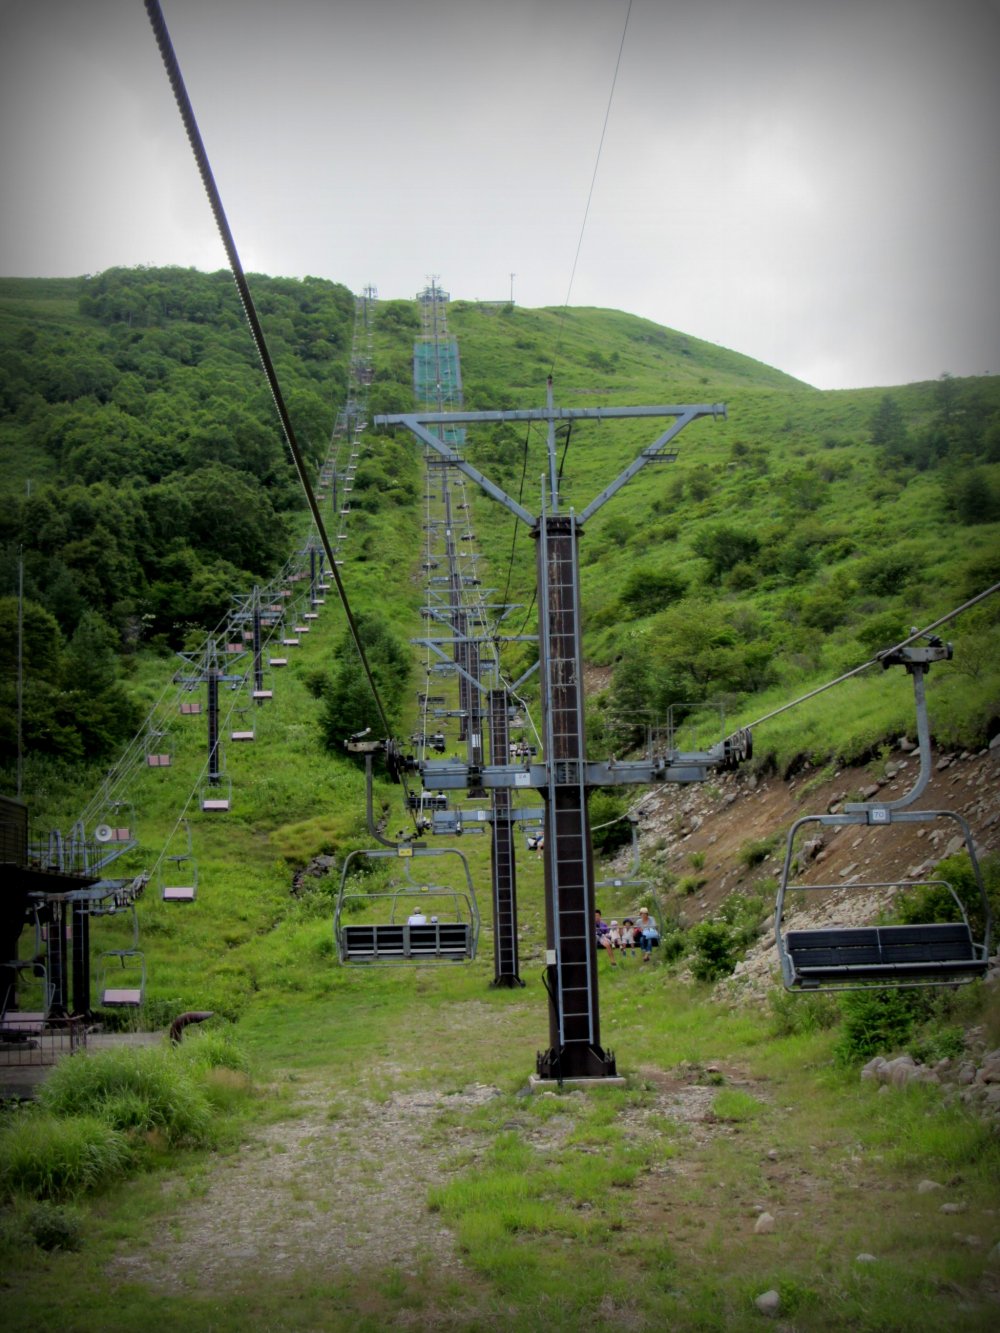 A few of the major lifts are open in the summertime, making getting to the summit pretty easy!